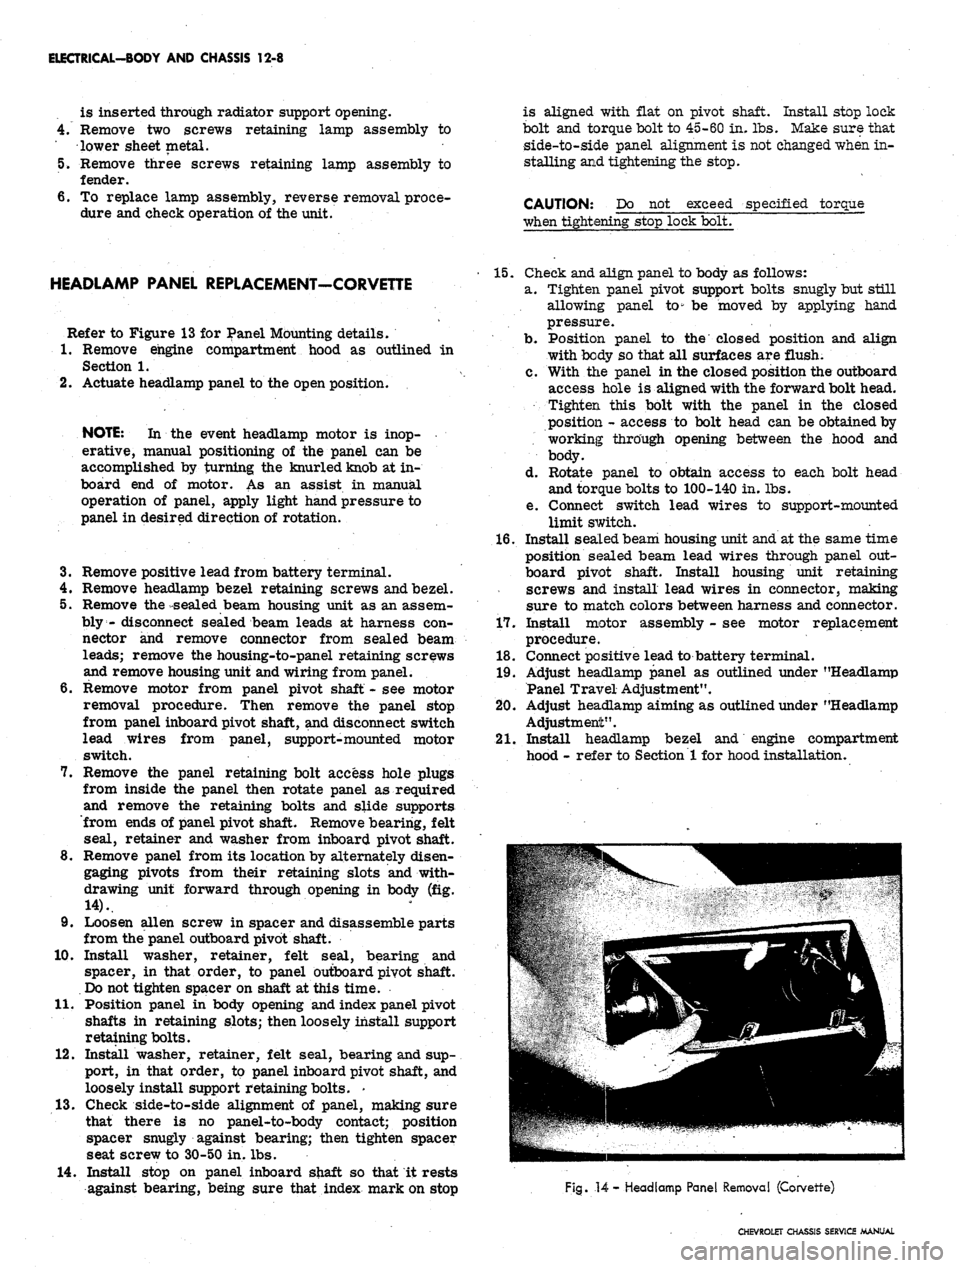 CHEVROLET CAMARO 1967 1.G Chassis User Guide 
ELECTRICAL-BODY AND CHASSIS 12-8

is inserted through radiator support opening.

Remove two screws retaining lamp assembly to

lower sheet metal.

Remove three screws retaining lamp assembly to

lend